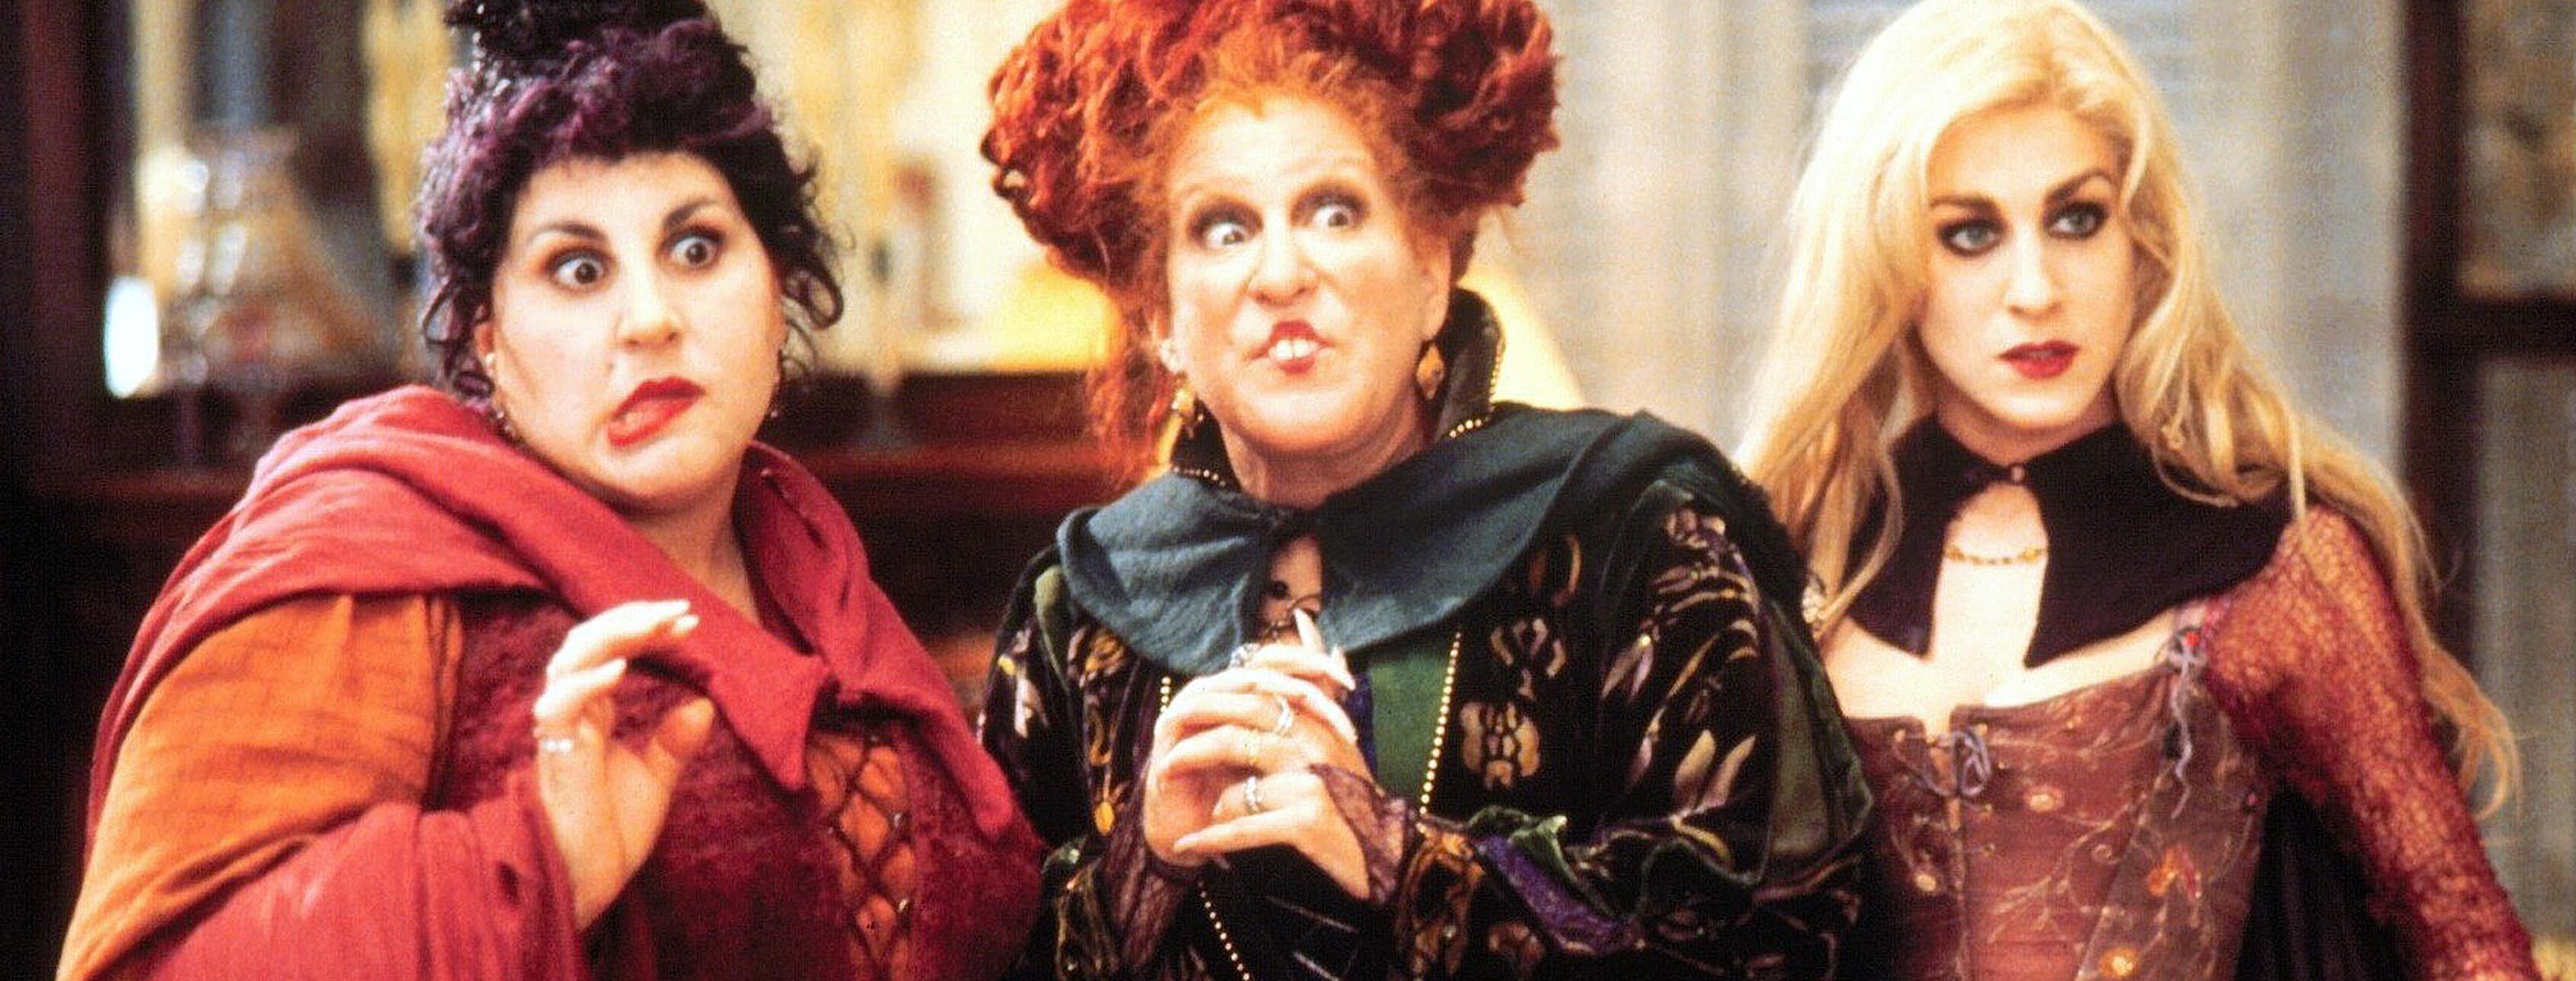 Hocus Pocus 2 director open to bringing Sanderson sisters back for